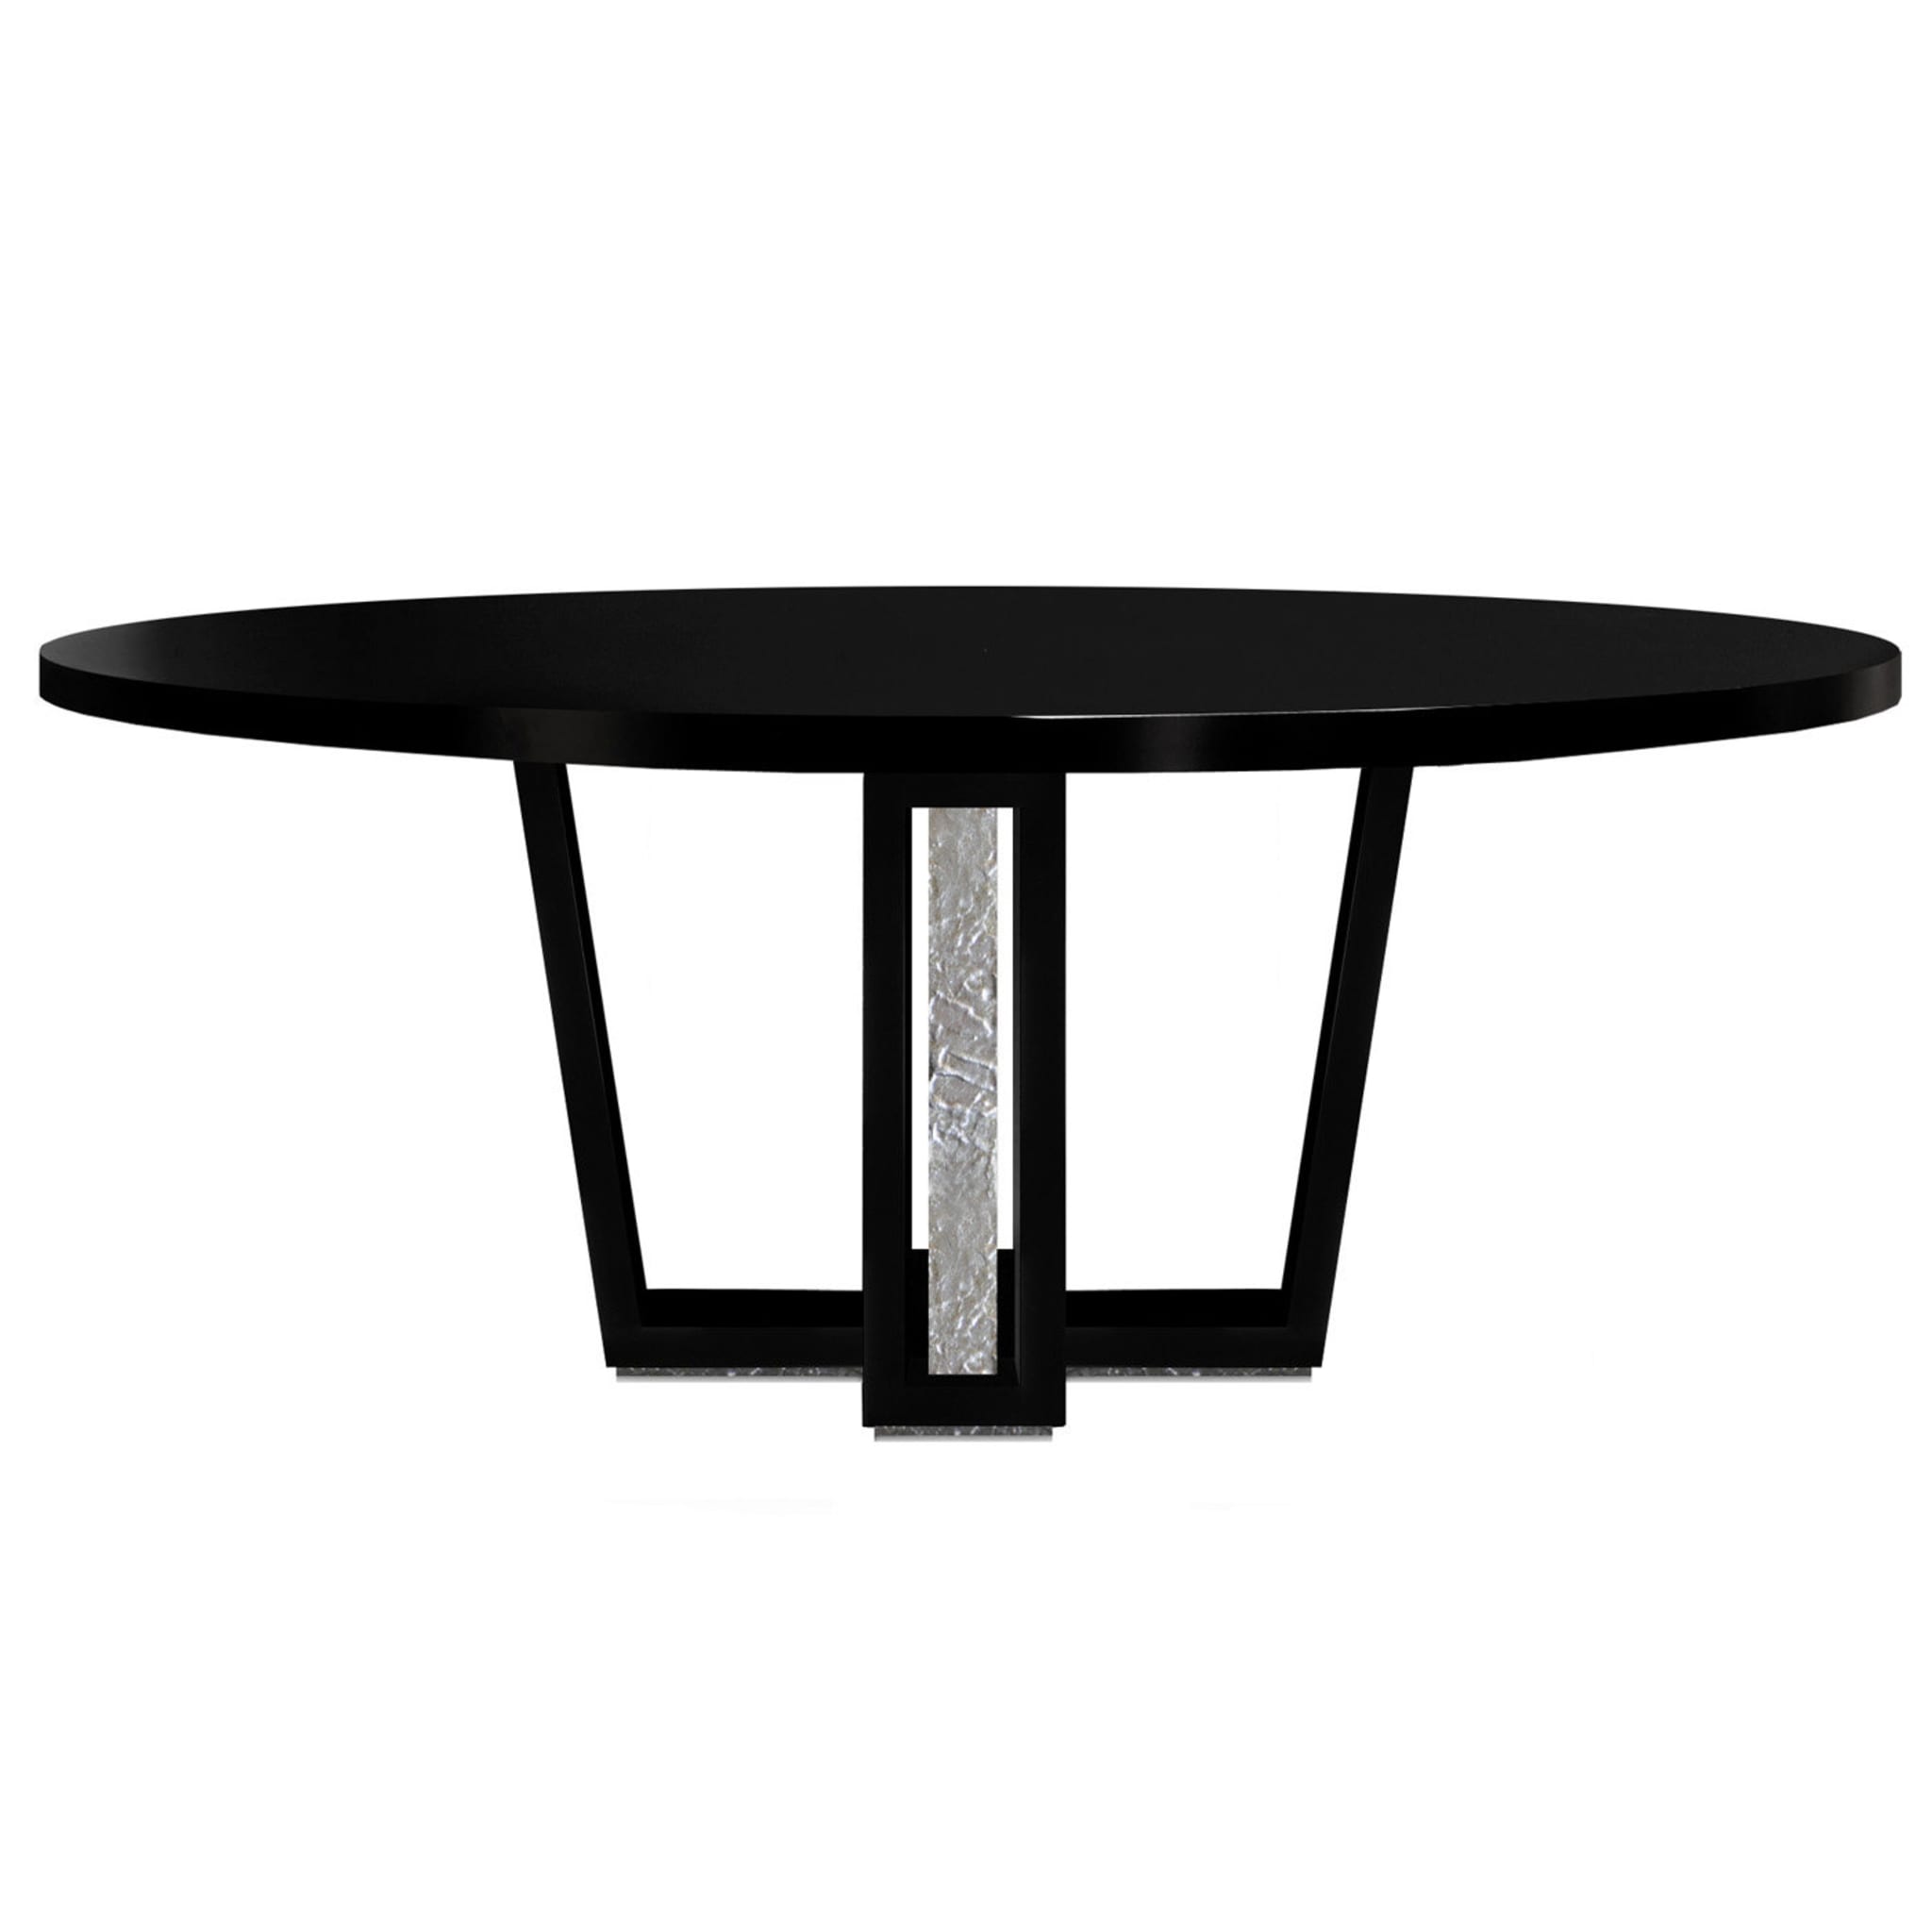 Cleofe Silver Dining Table - Alternative view 1